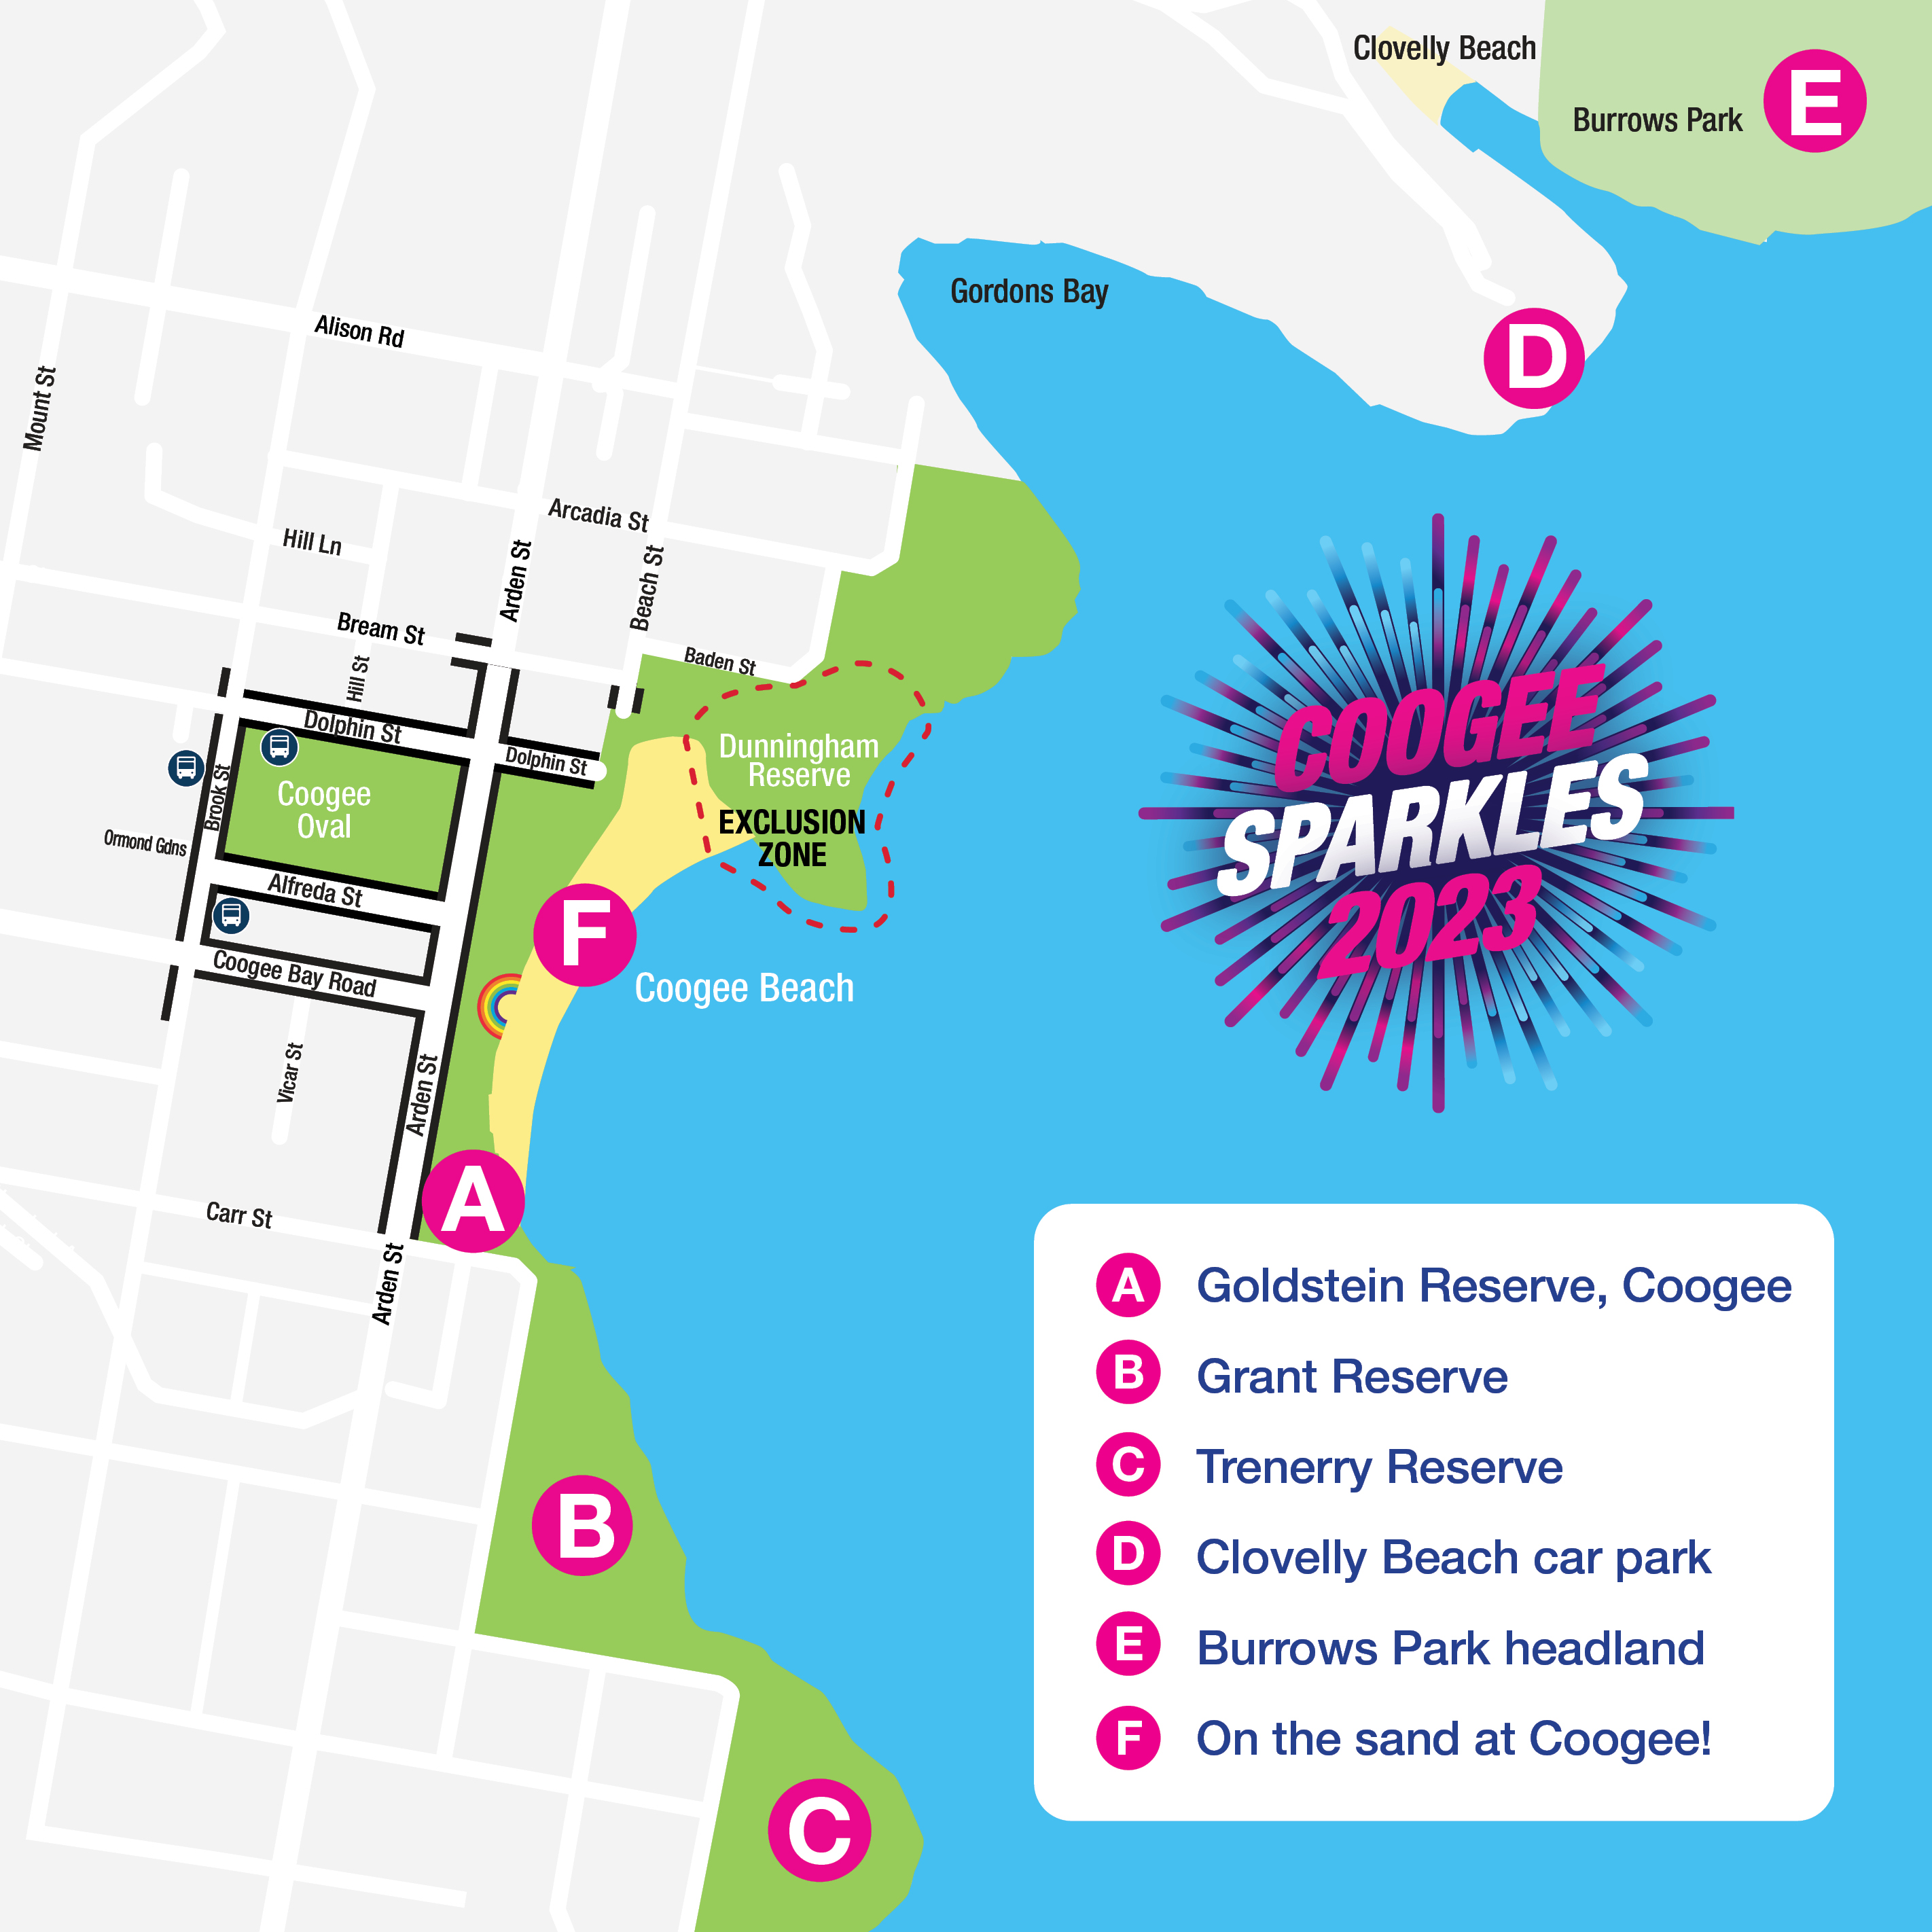 Map of fireworks vantage points in Coogee and Clovelly